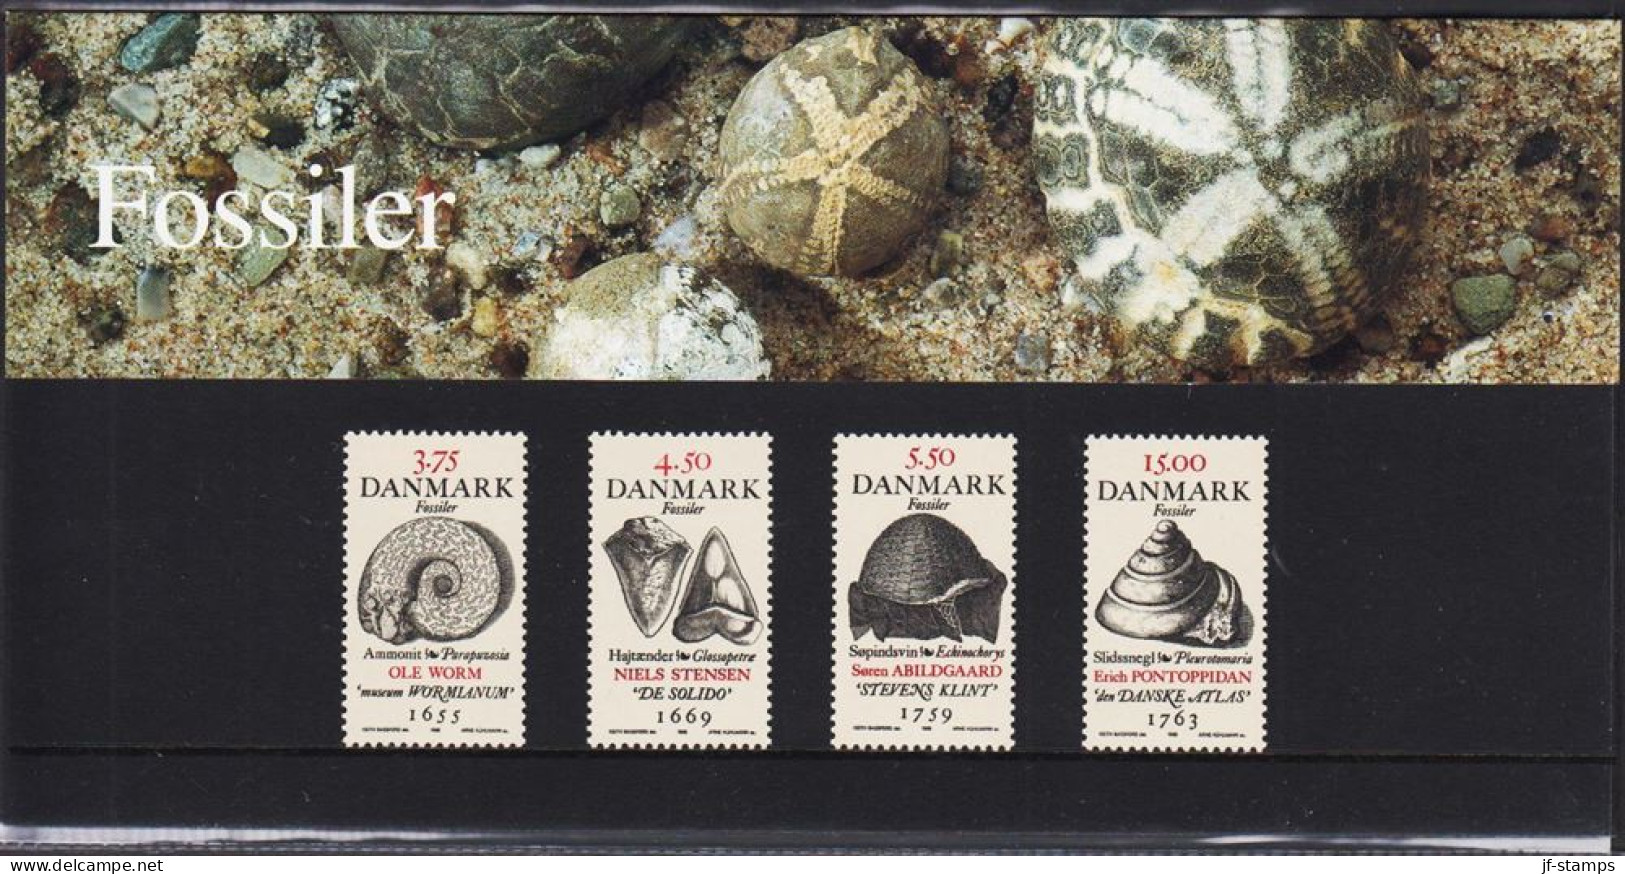 1998. DANMARK. Fossiler Complete Set In Official Folder (SM 32/1998) Never Hinged. (Michel 1195-1198) - JF544449 - Nuovi